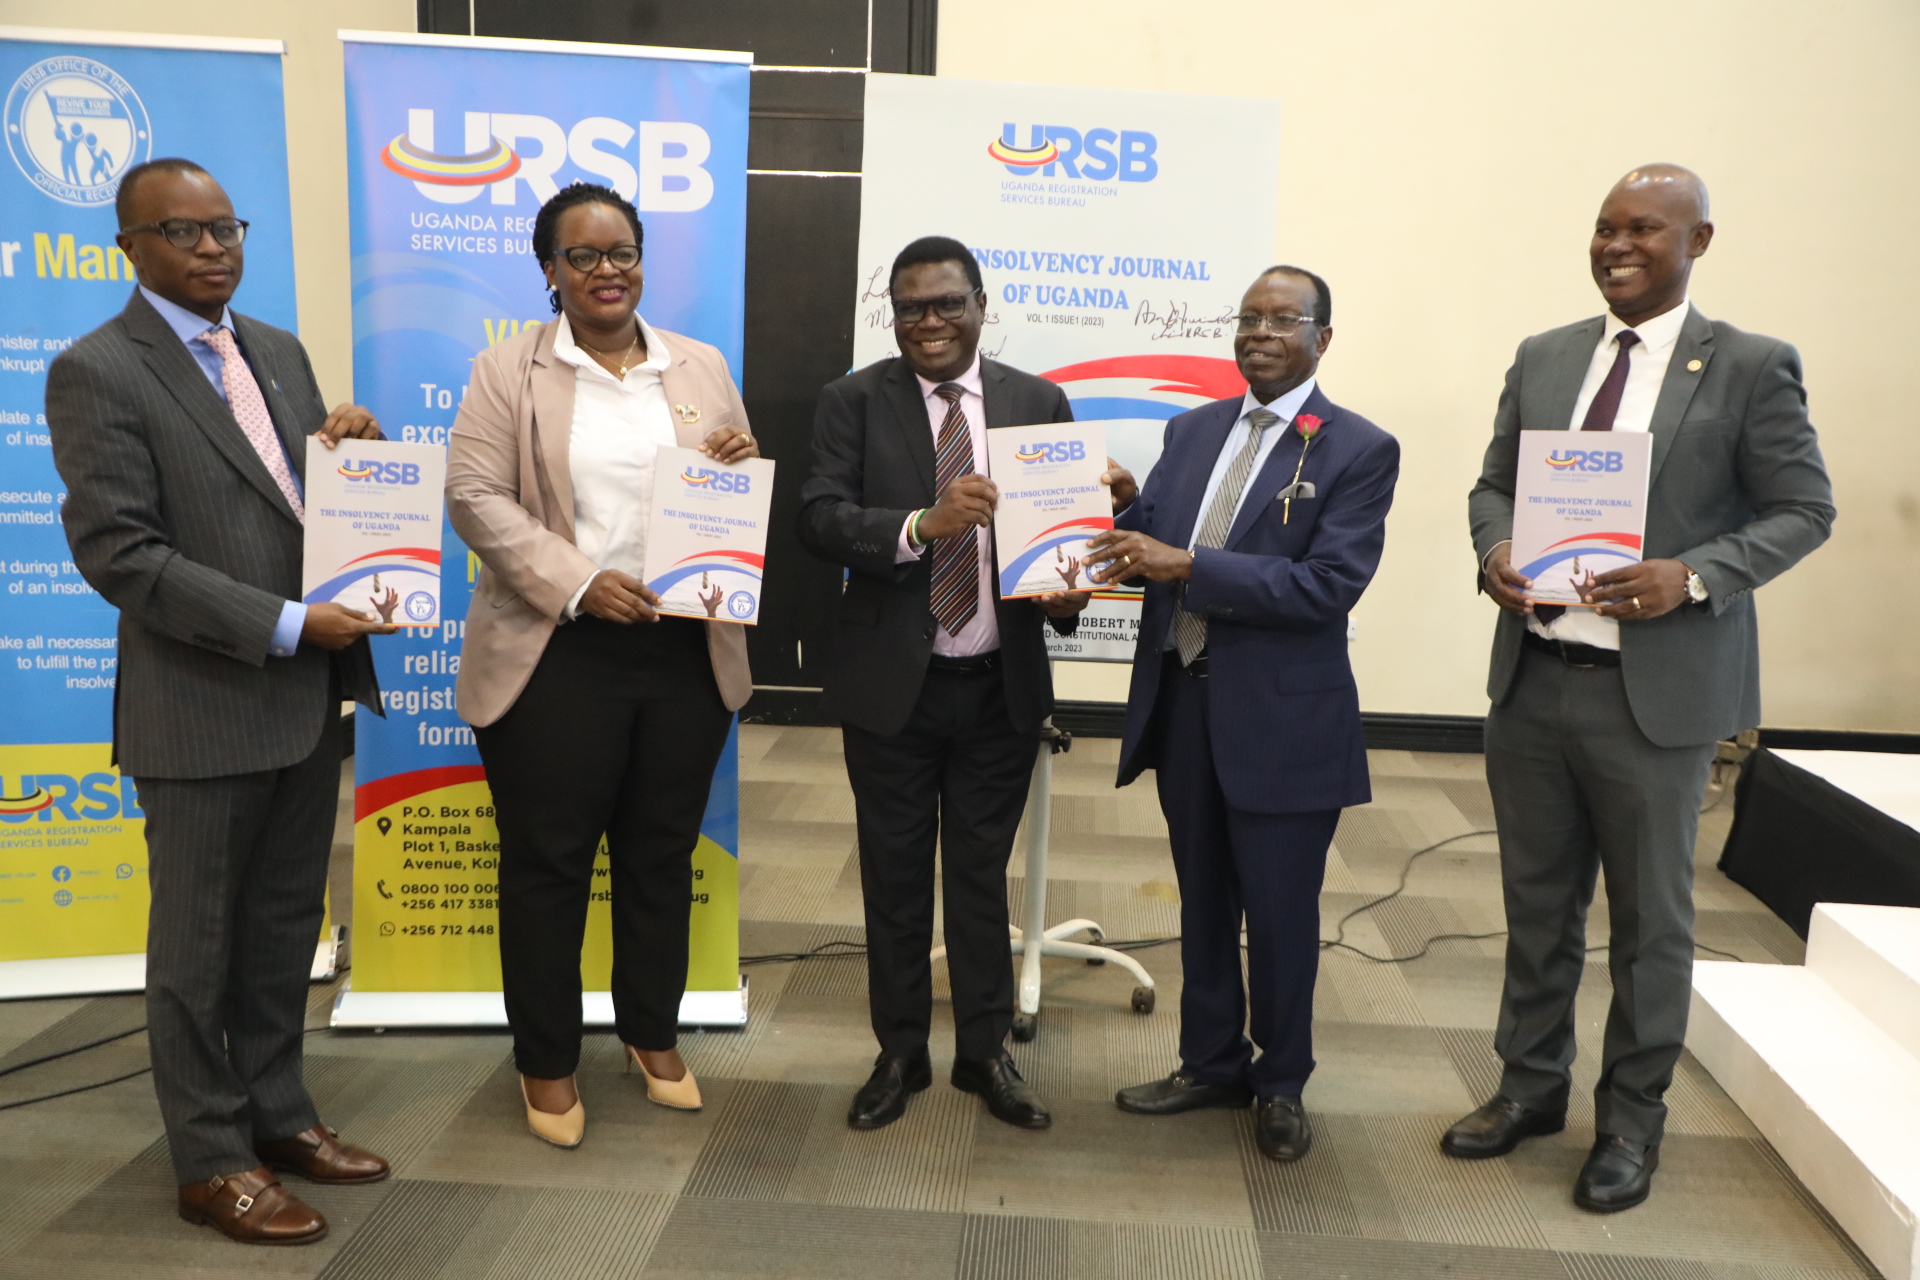 URSB  trains Judicial Officers, Lawyers on Insolvency and Restructuring Practice